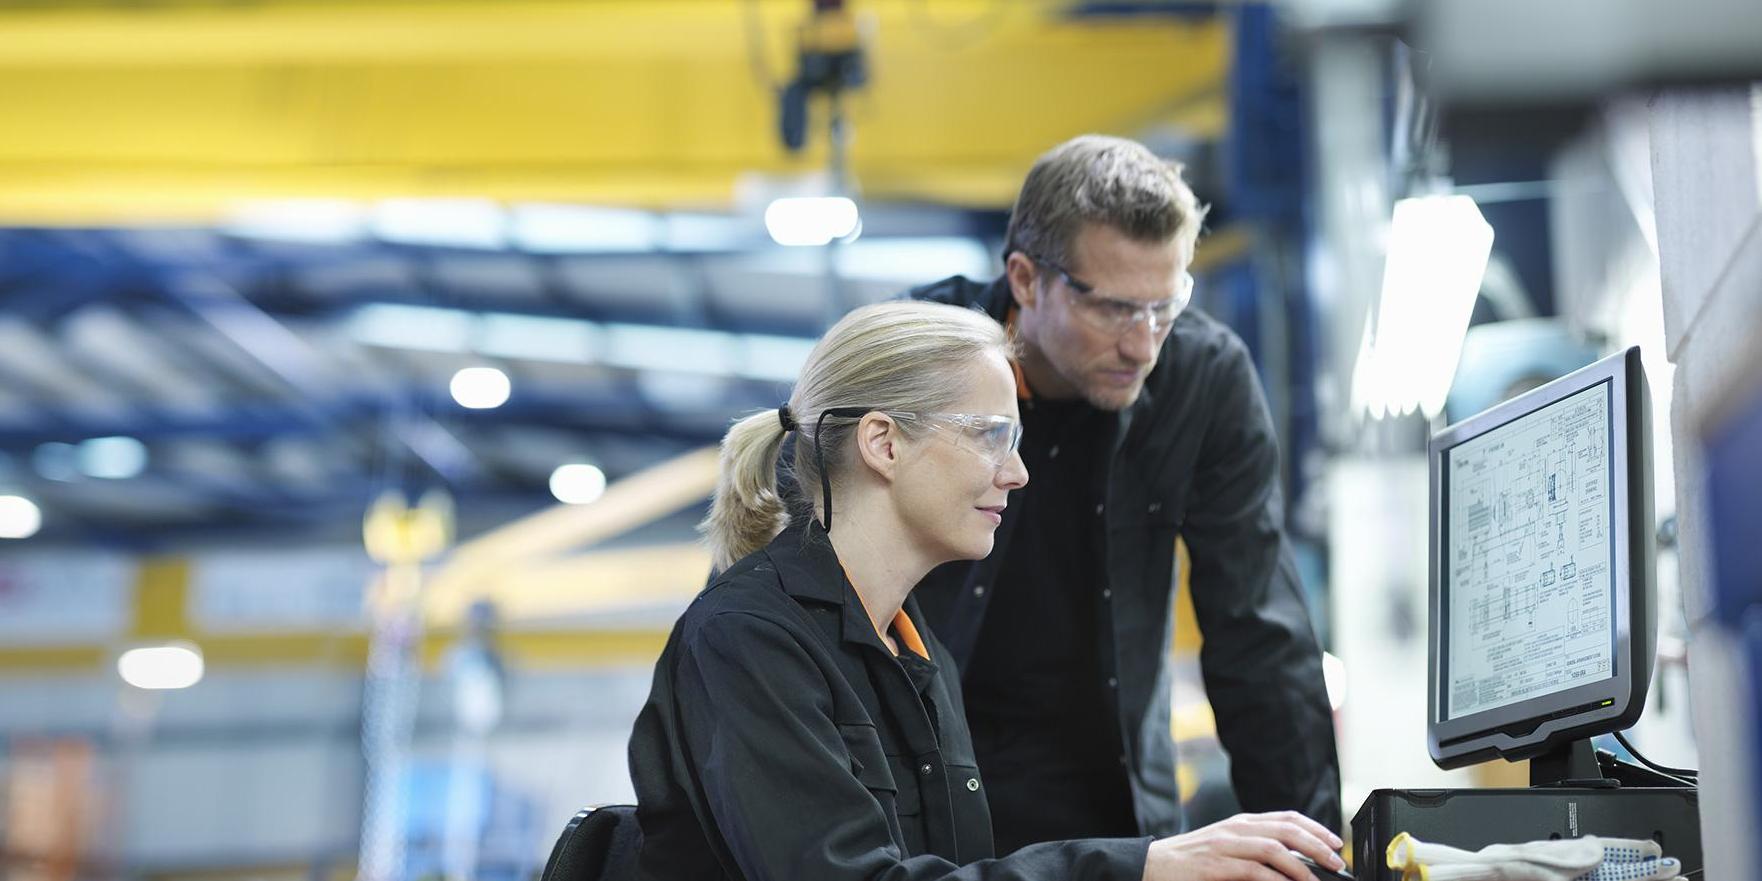 Man and woman in front of computer screen in factory